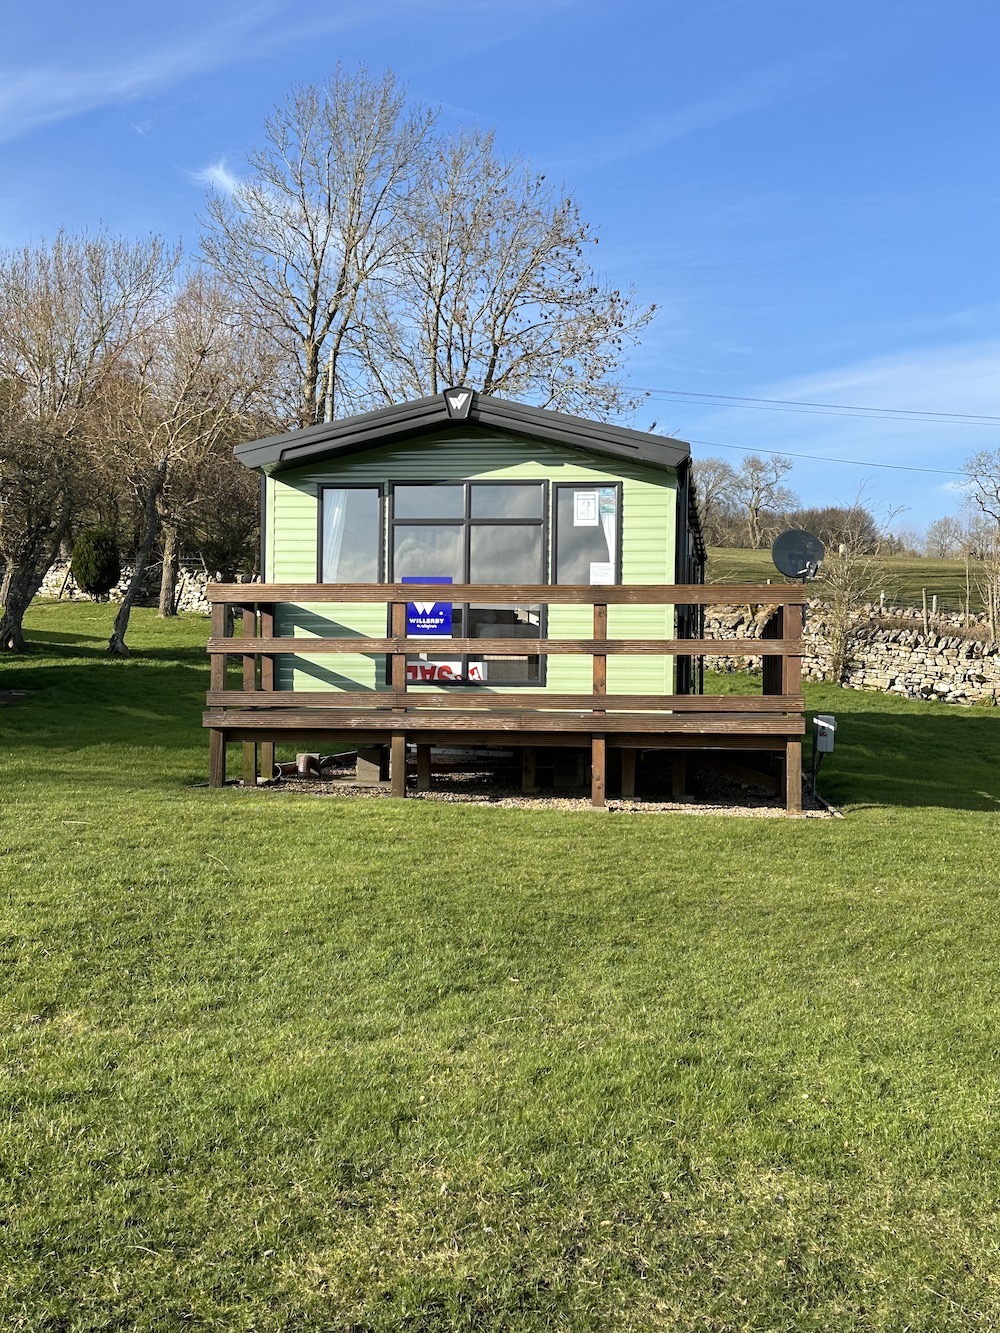 The 2022 Willerby Manor New Static Caravan